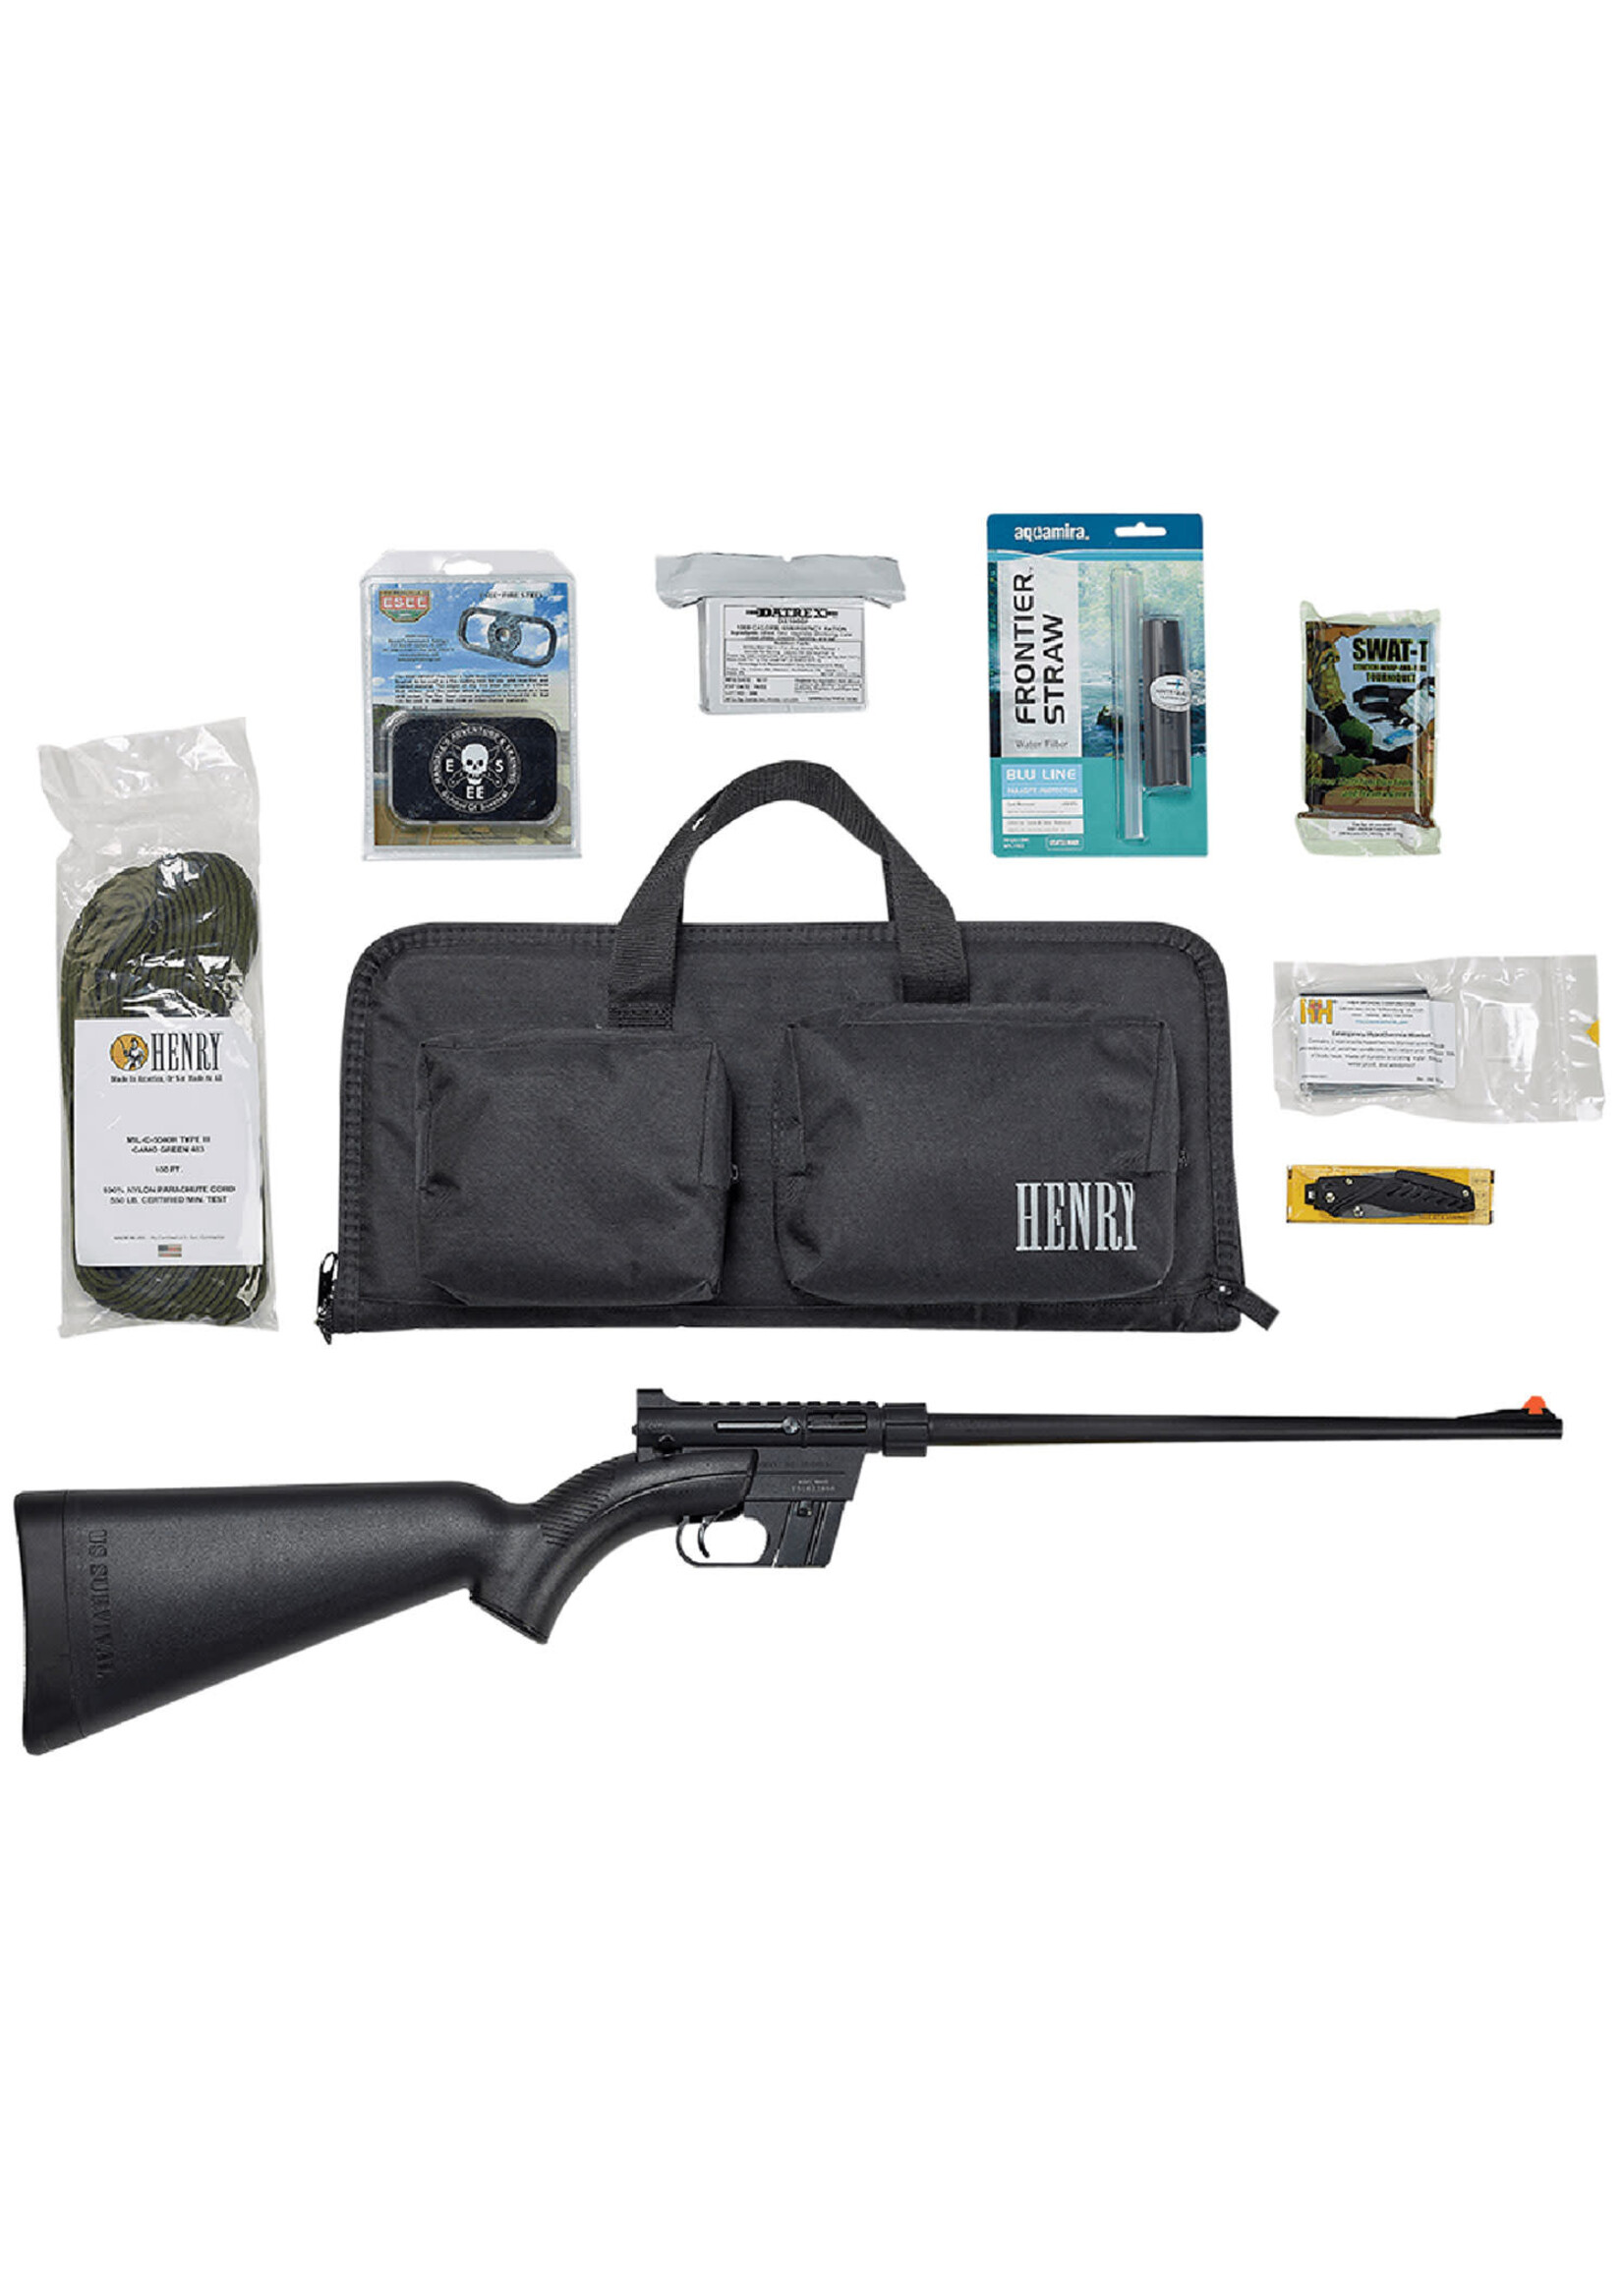 Henry Henry H002BSGB U.S. Survival Pack AR-7 22 LR Caliber with 8+1 Capacity, 16.13" Barrel, Black Metal Finish & Black Synthetic Stock Right Hand (Full Size) Includes Gear